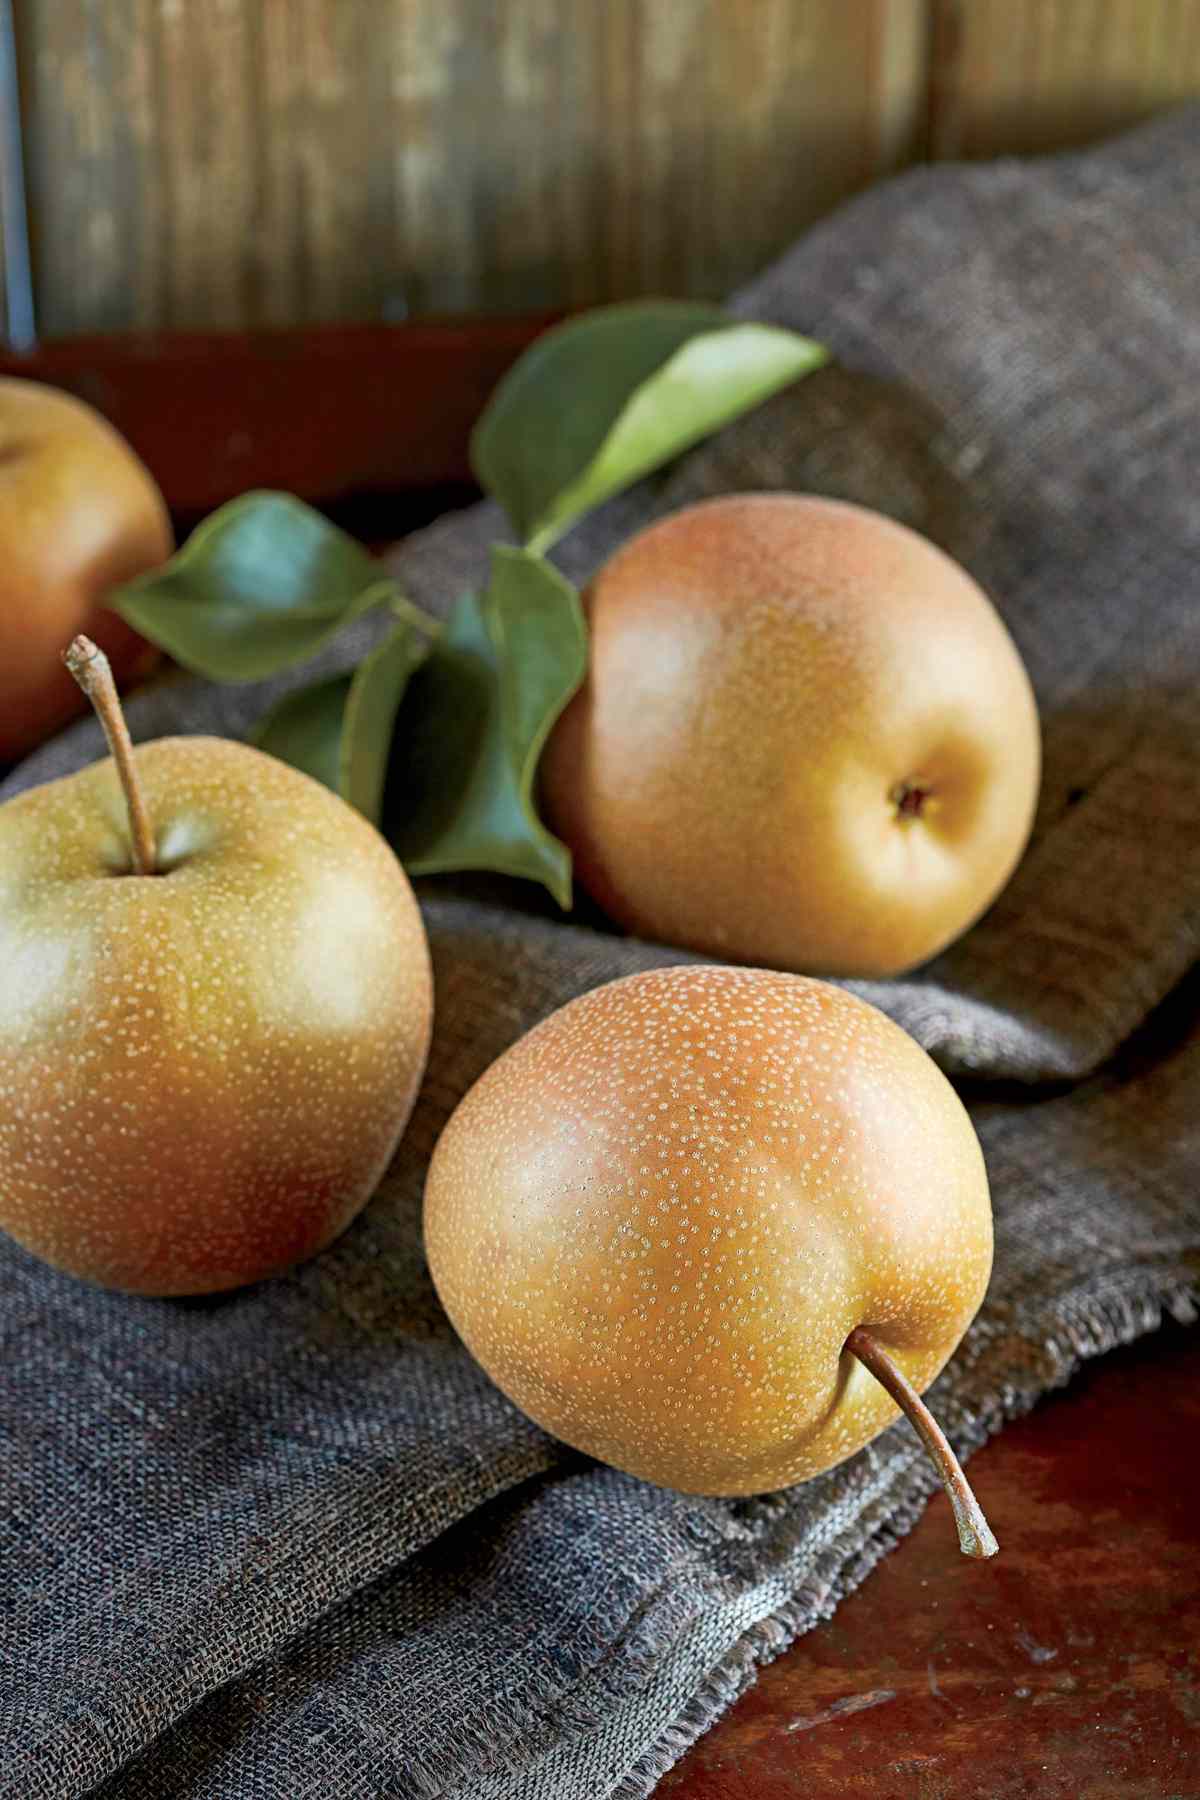 Relish These Pears Image